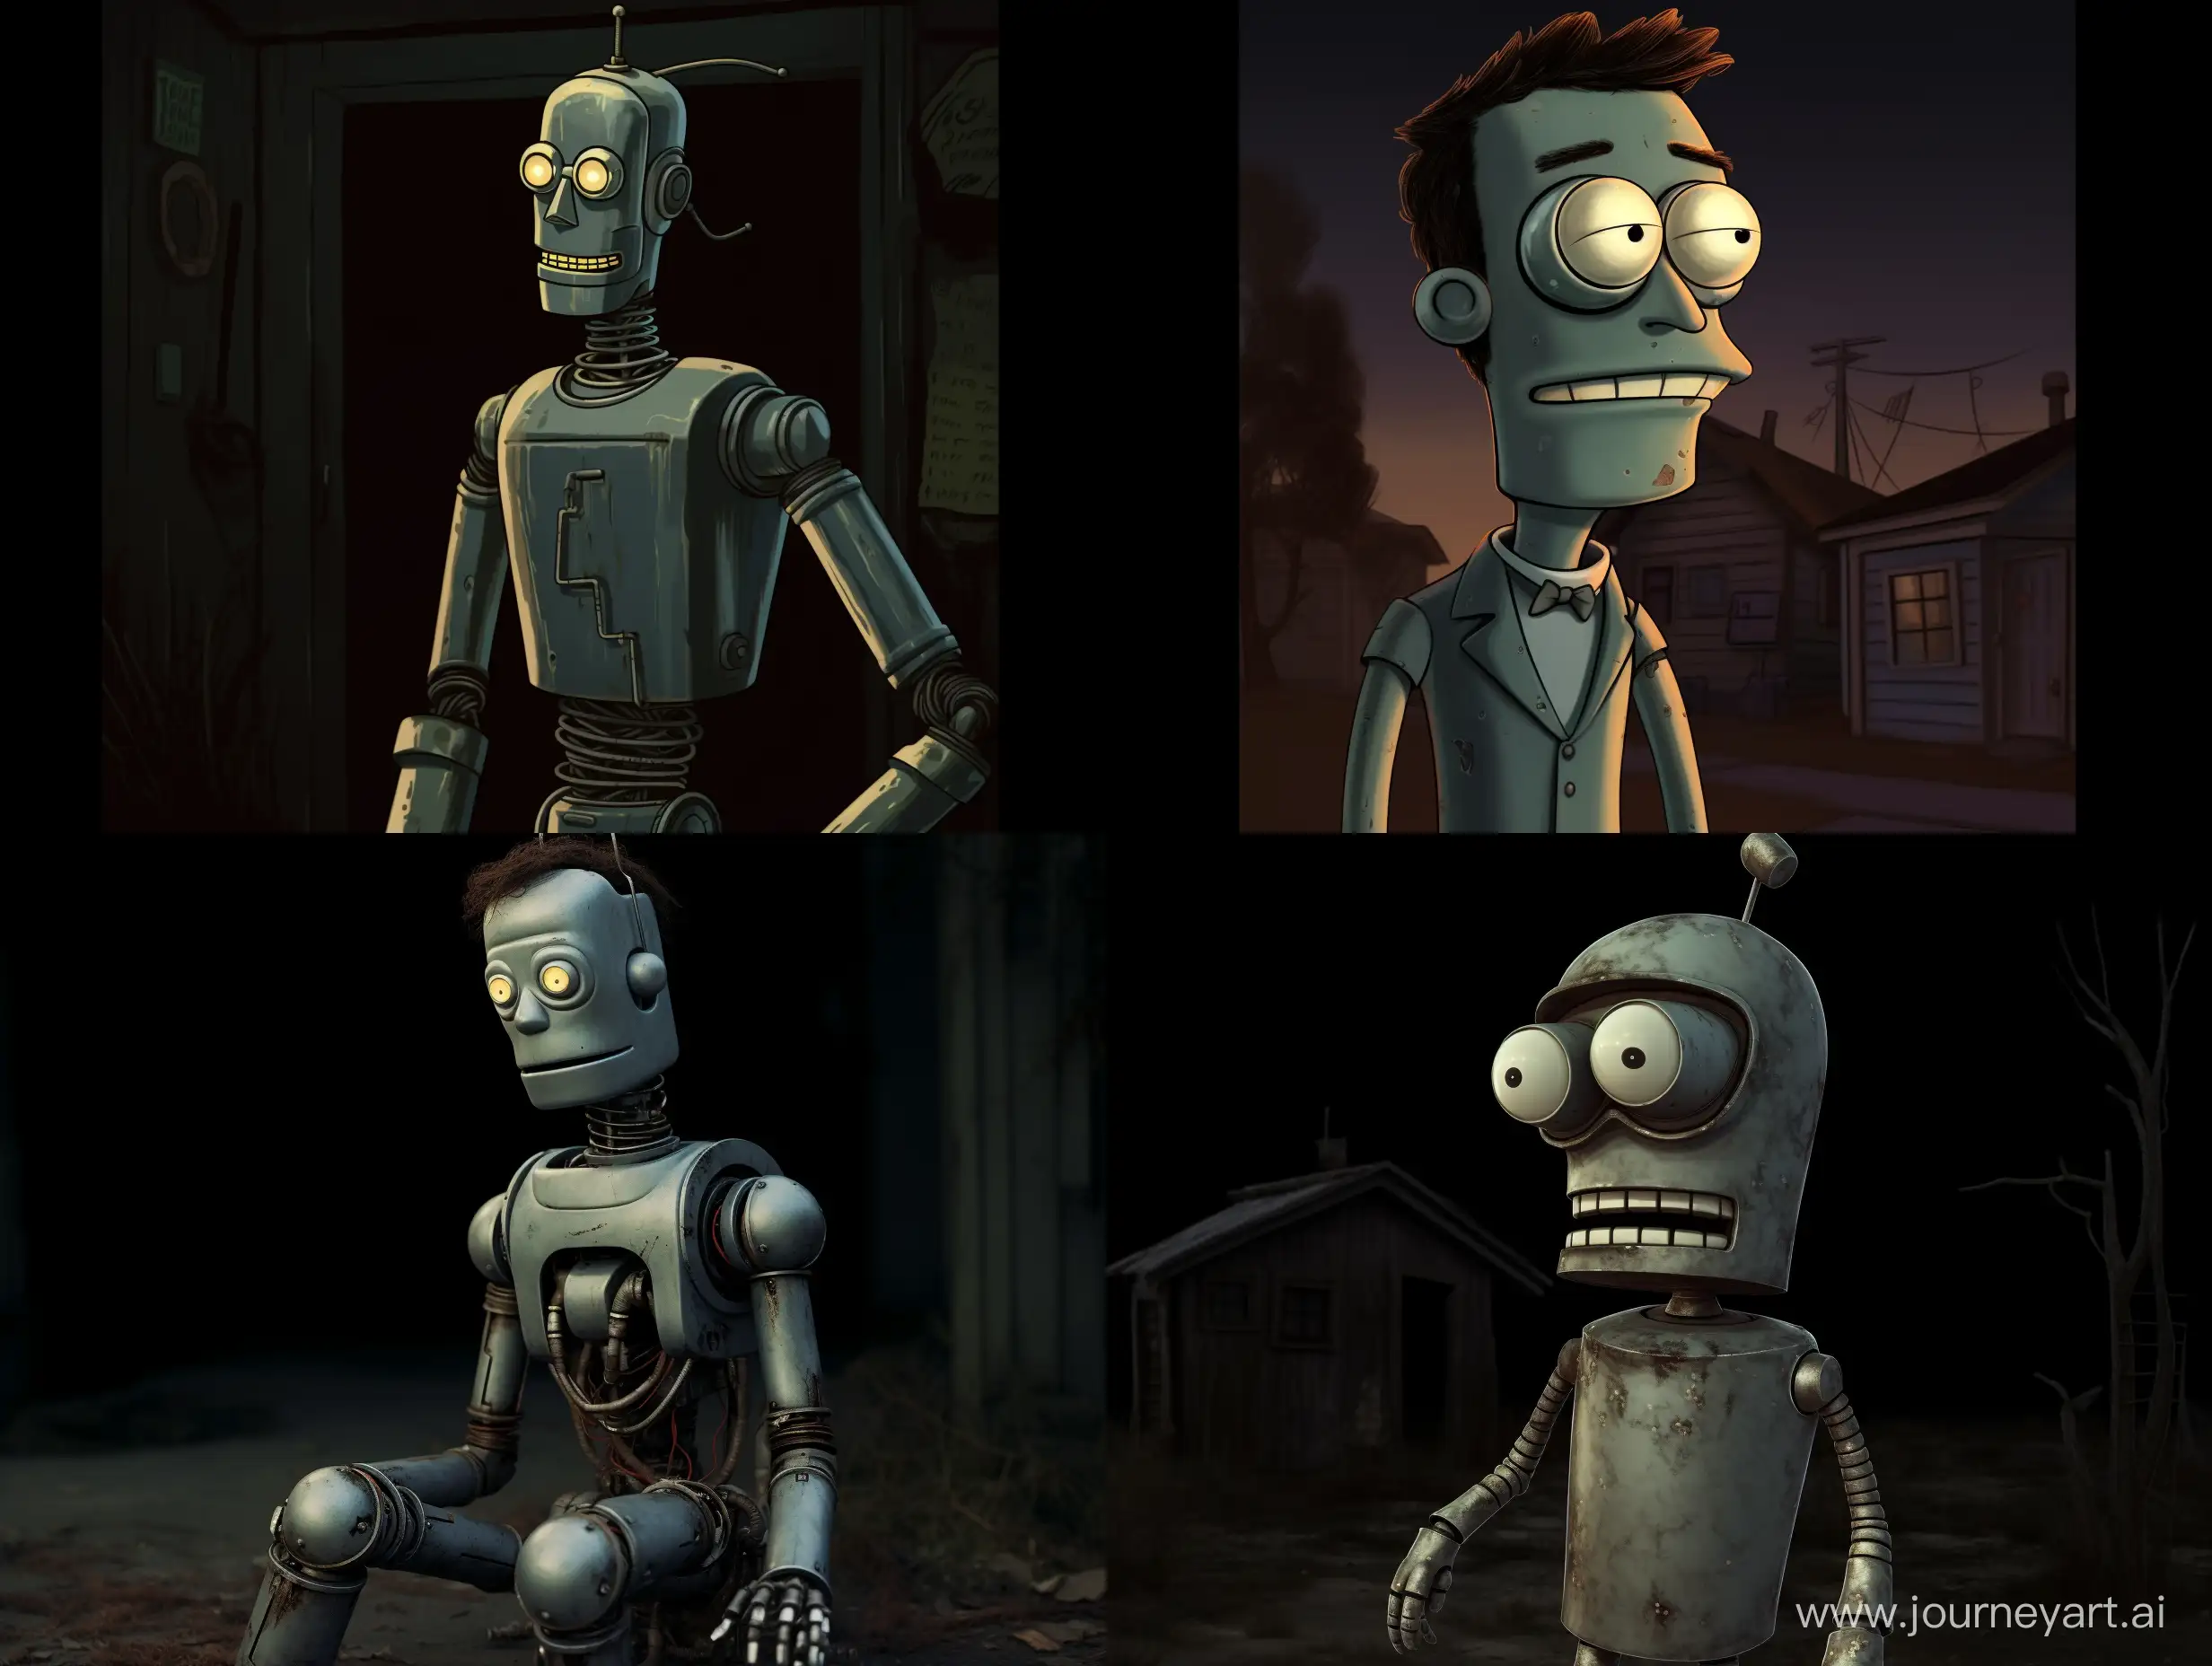 Bender-from-Futurama-Standing-Outside-His-Realistic-Home